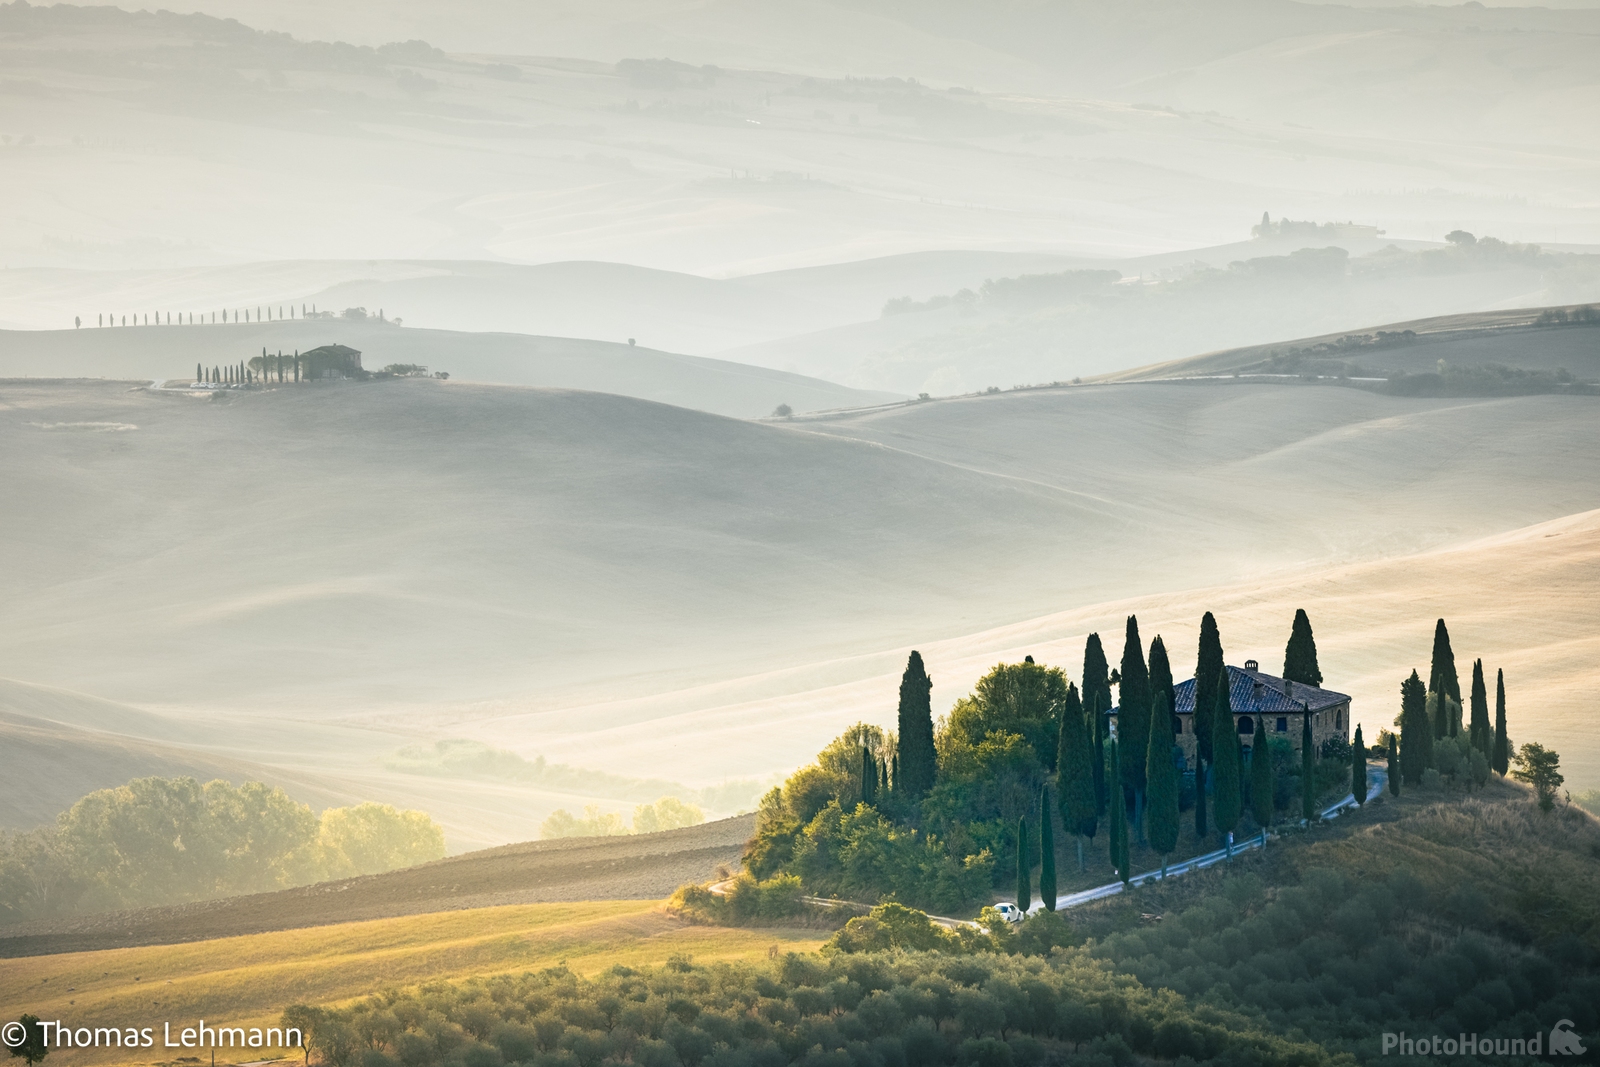 Image of Podere Belvedere by Thomas Lehmann